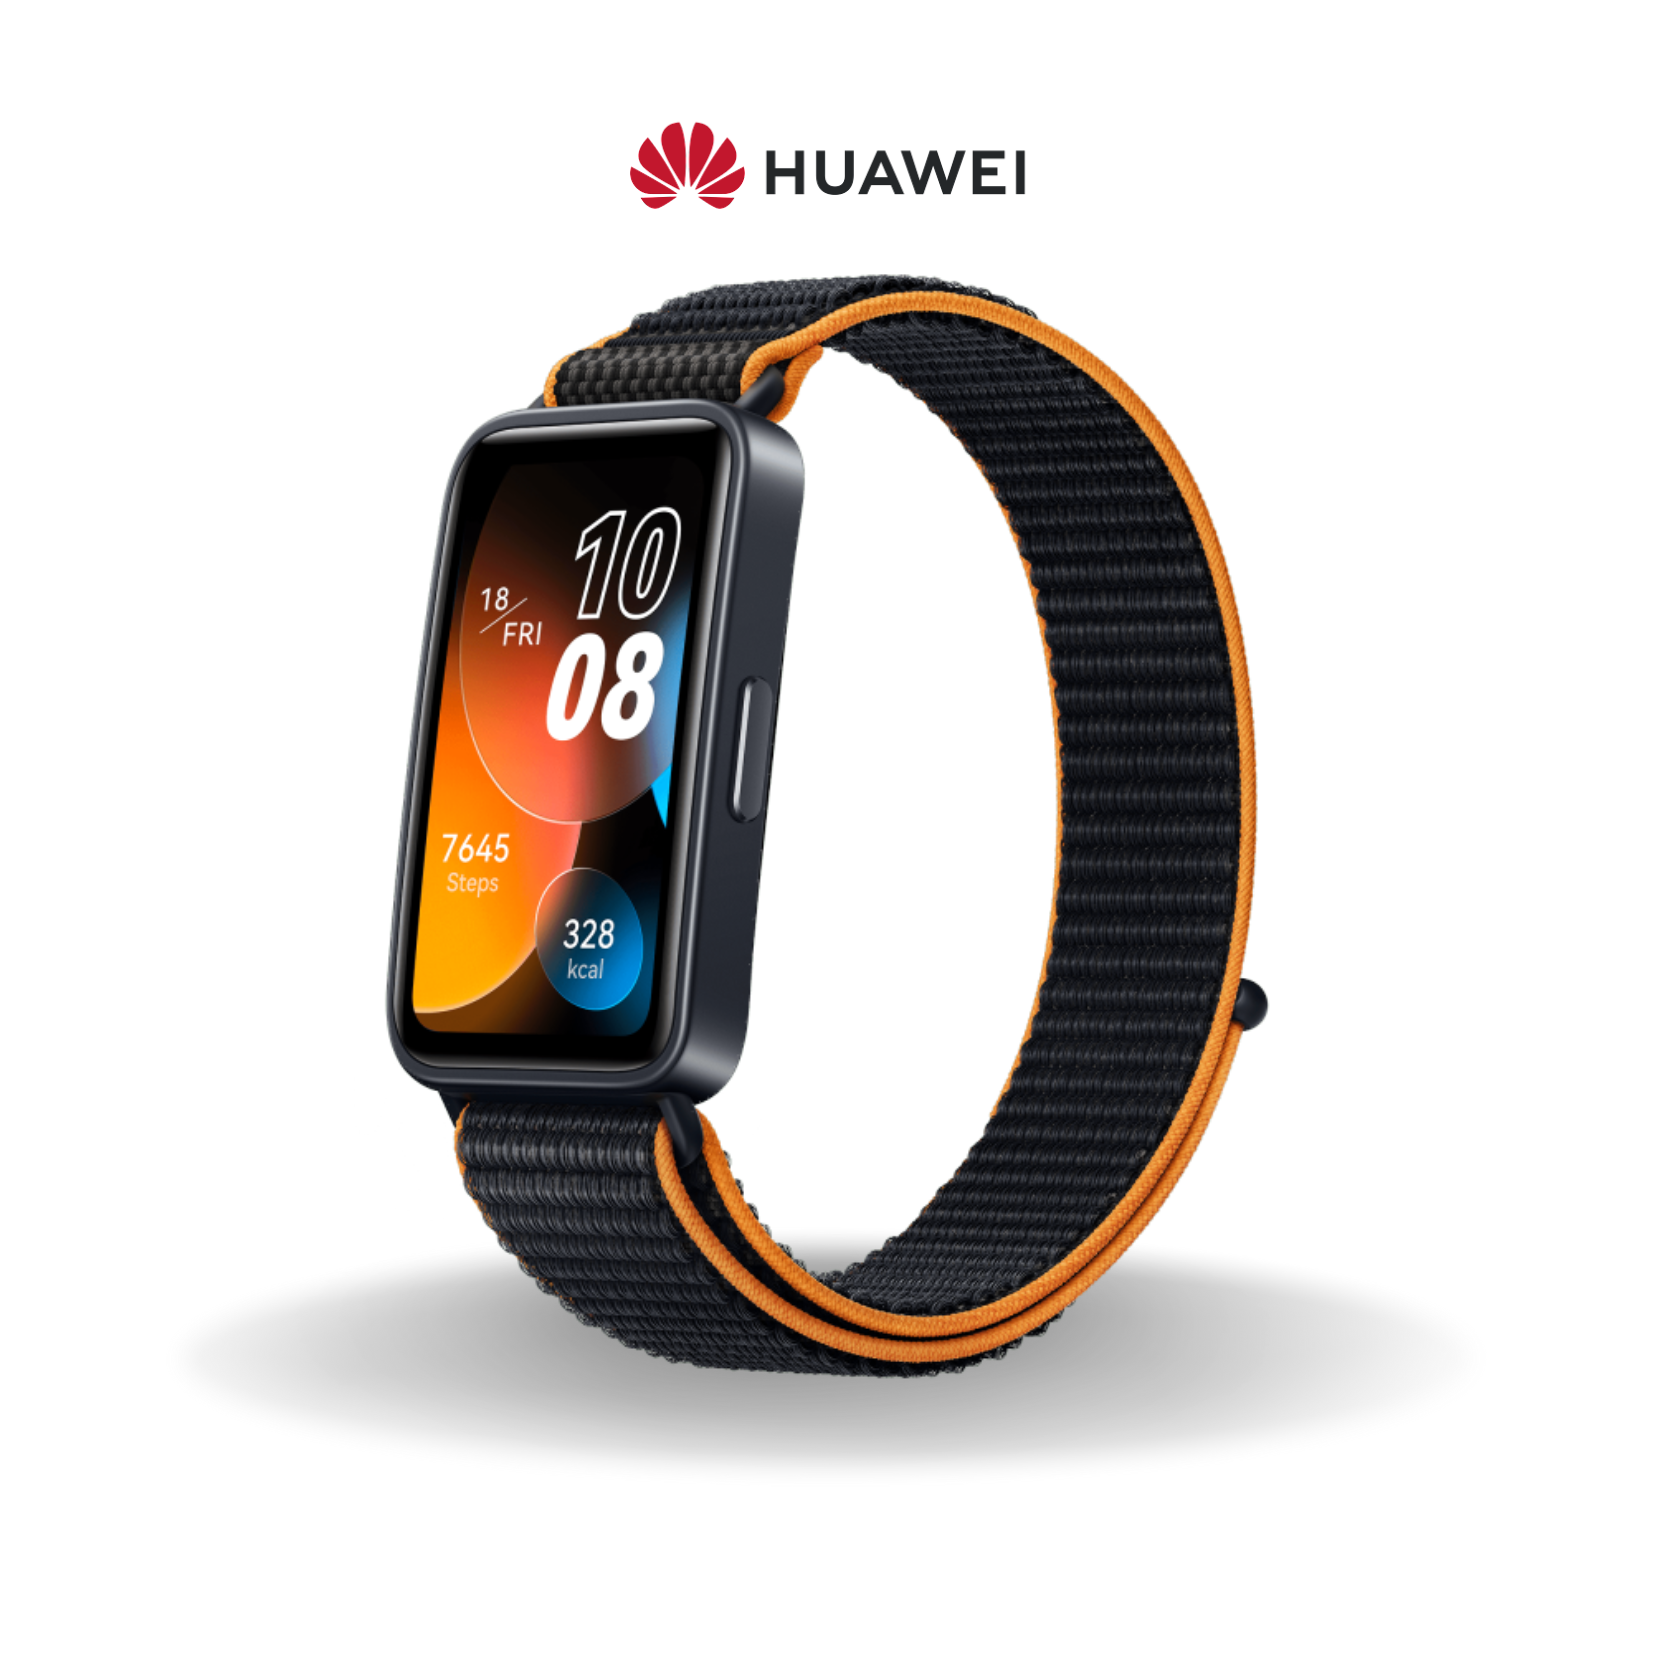 Huawei Band 8 Midnight Black Health and Fitness Tracker